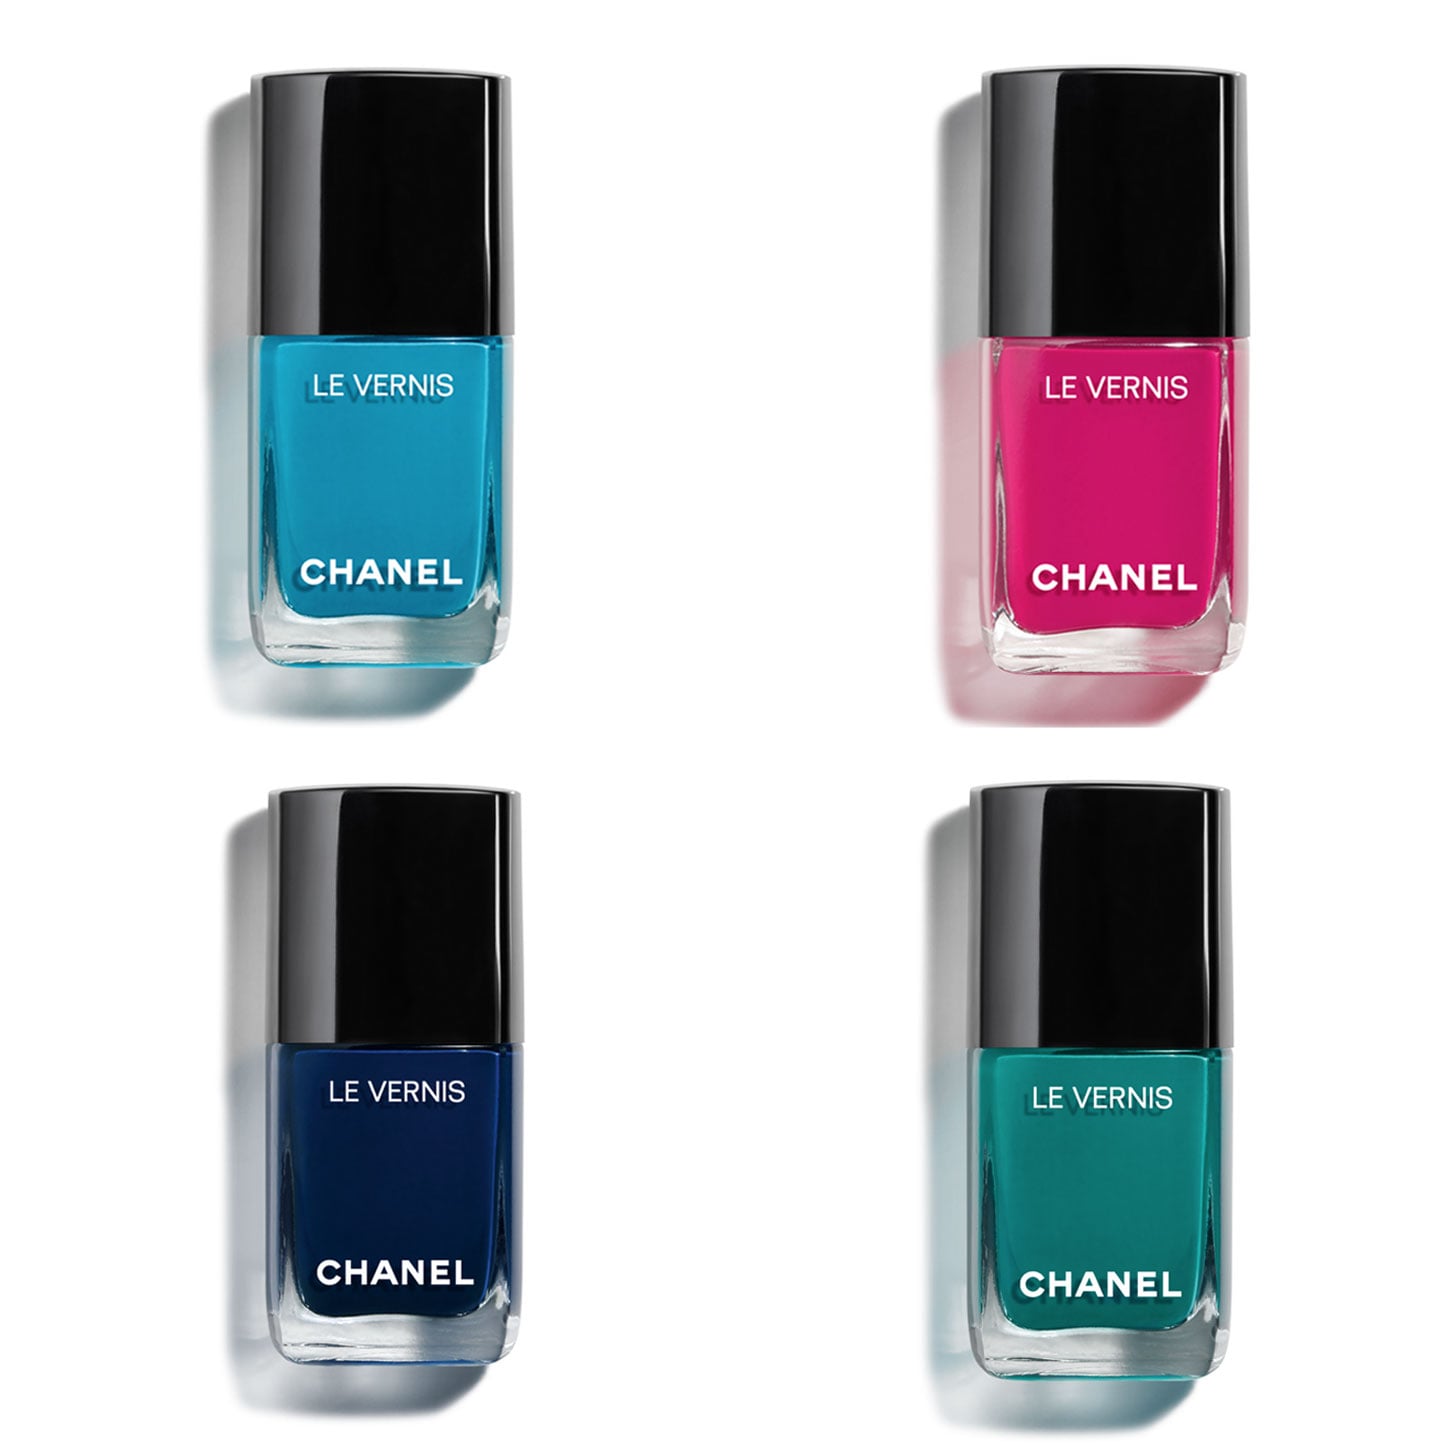 Chanel Le Vernis Nail Colour, The Best New Beauty Products Launching in  the UK in June 2020